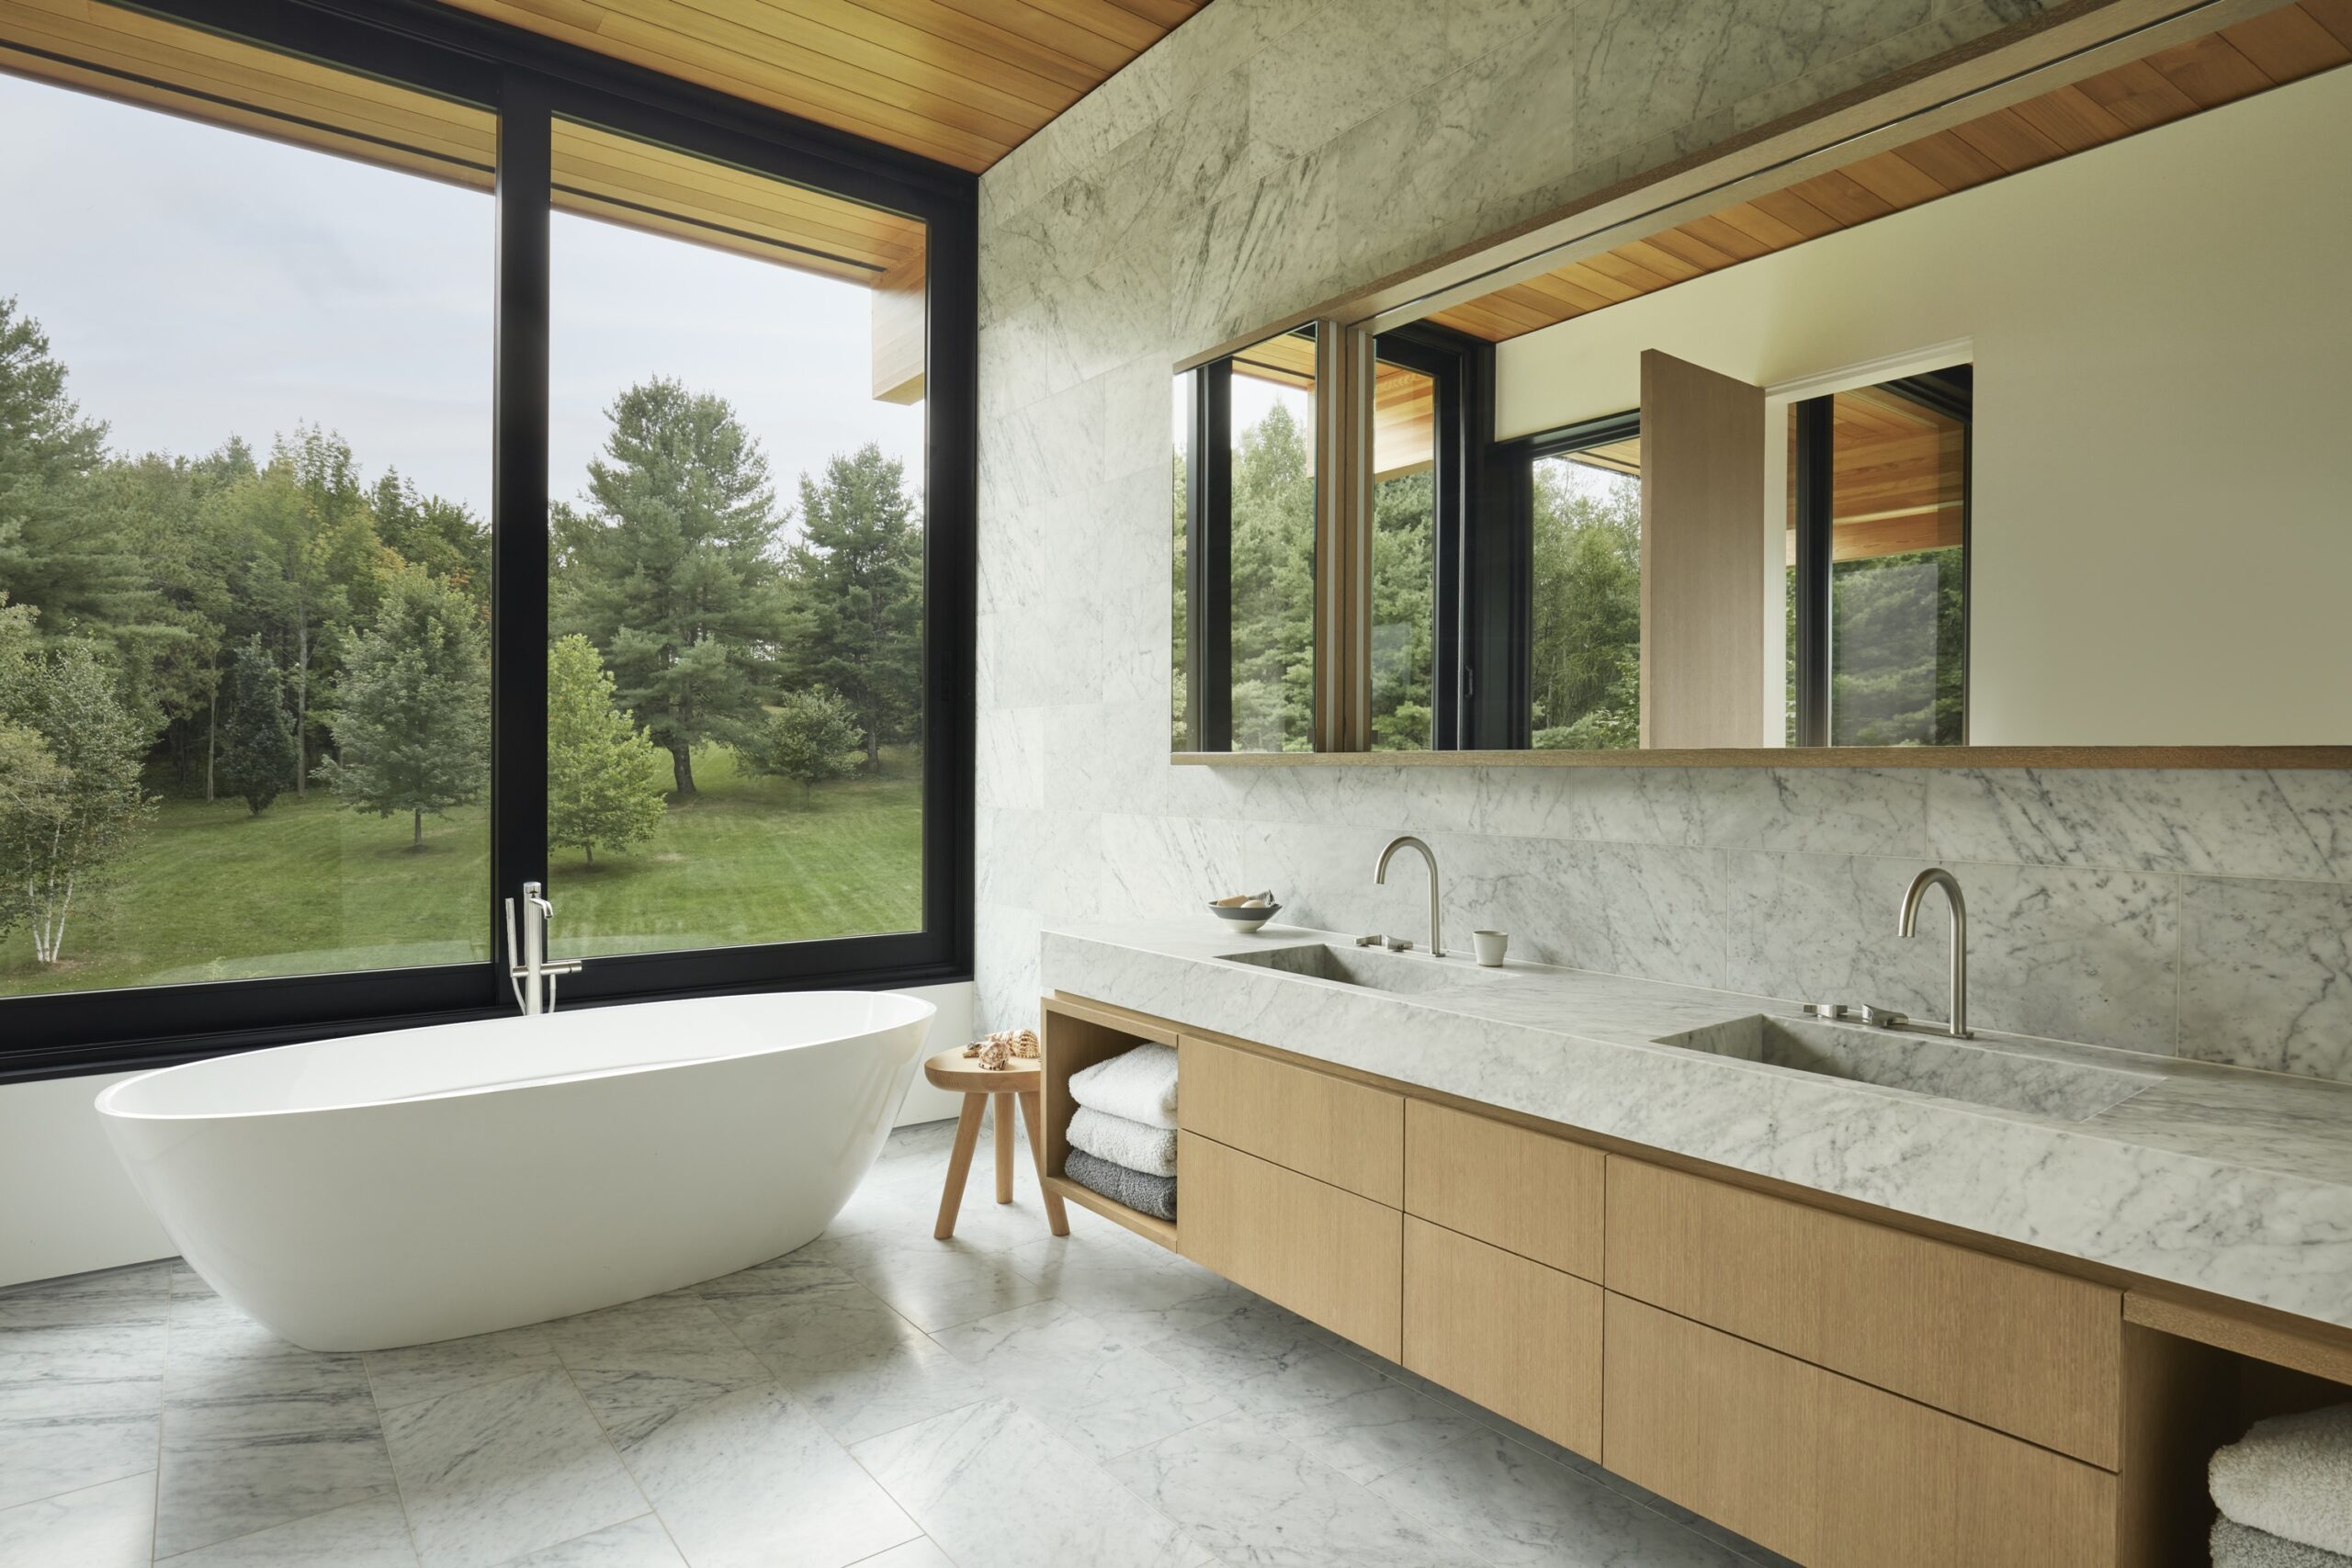 Bathroom with a double sink, freestanding tub, and view of the wooded landscape